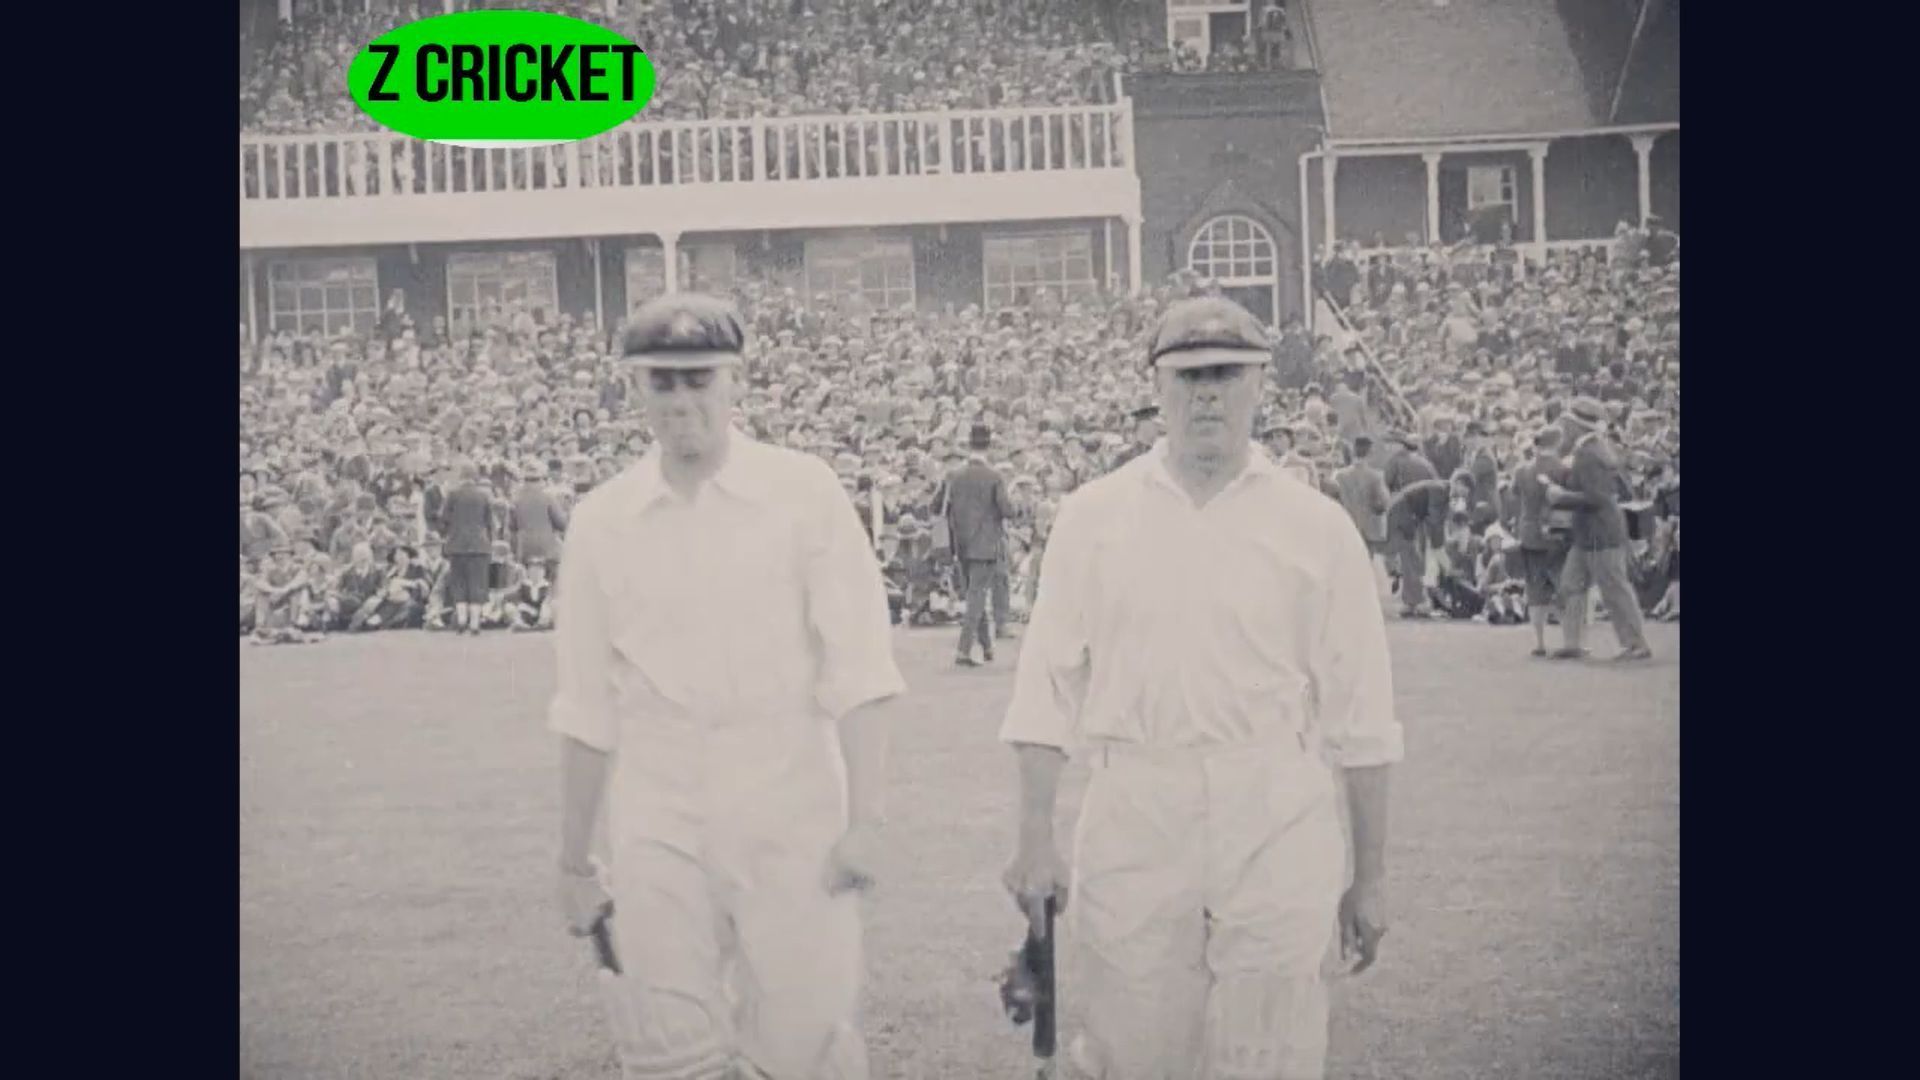 Charles Macartney walking out to bat with Bill Woodful after lunch on Day 1 in the Leeds Test of 1926 (Image: YouTube/Z Cricket)